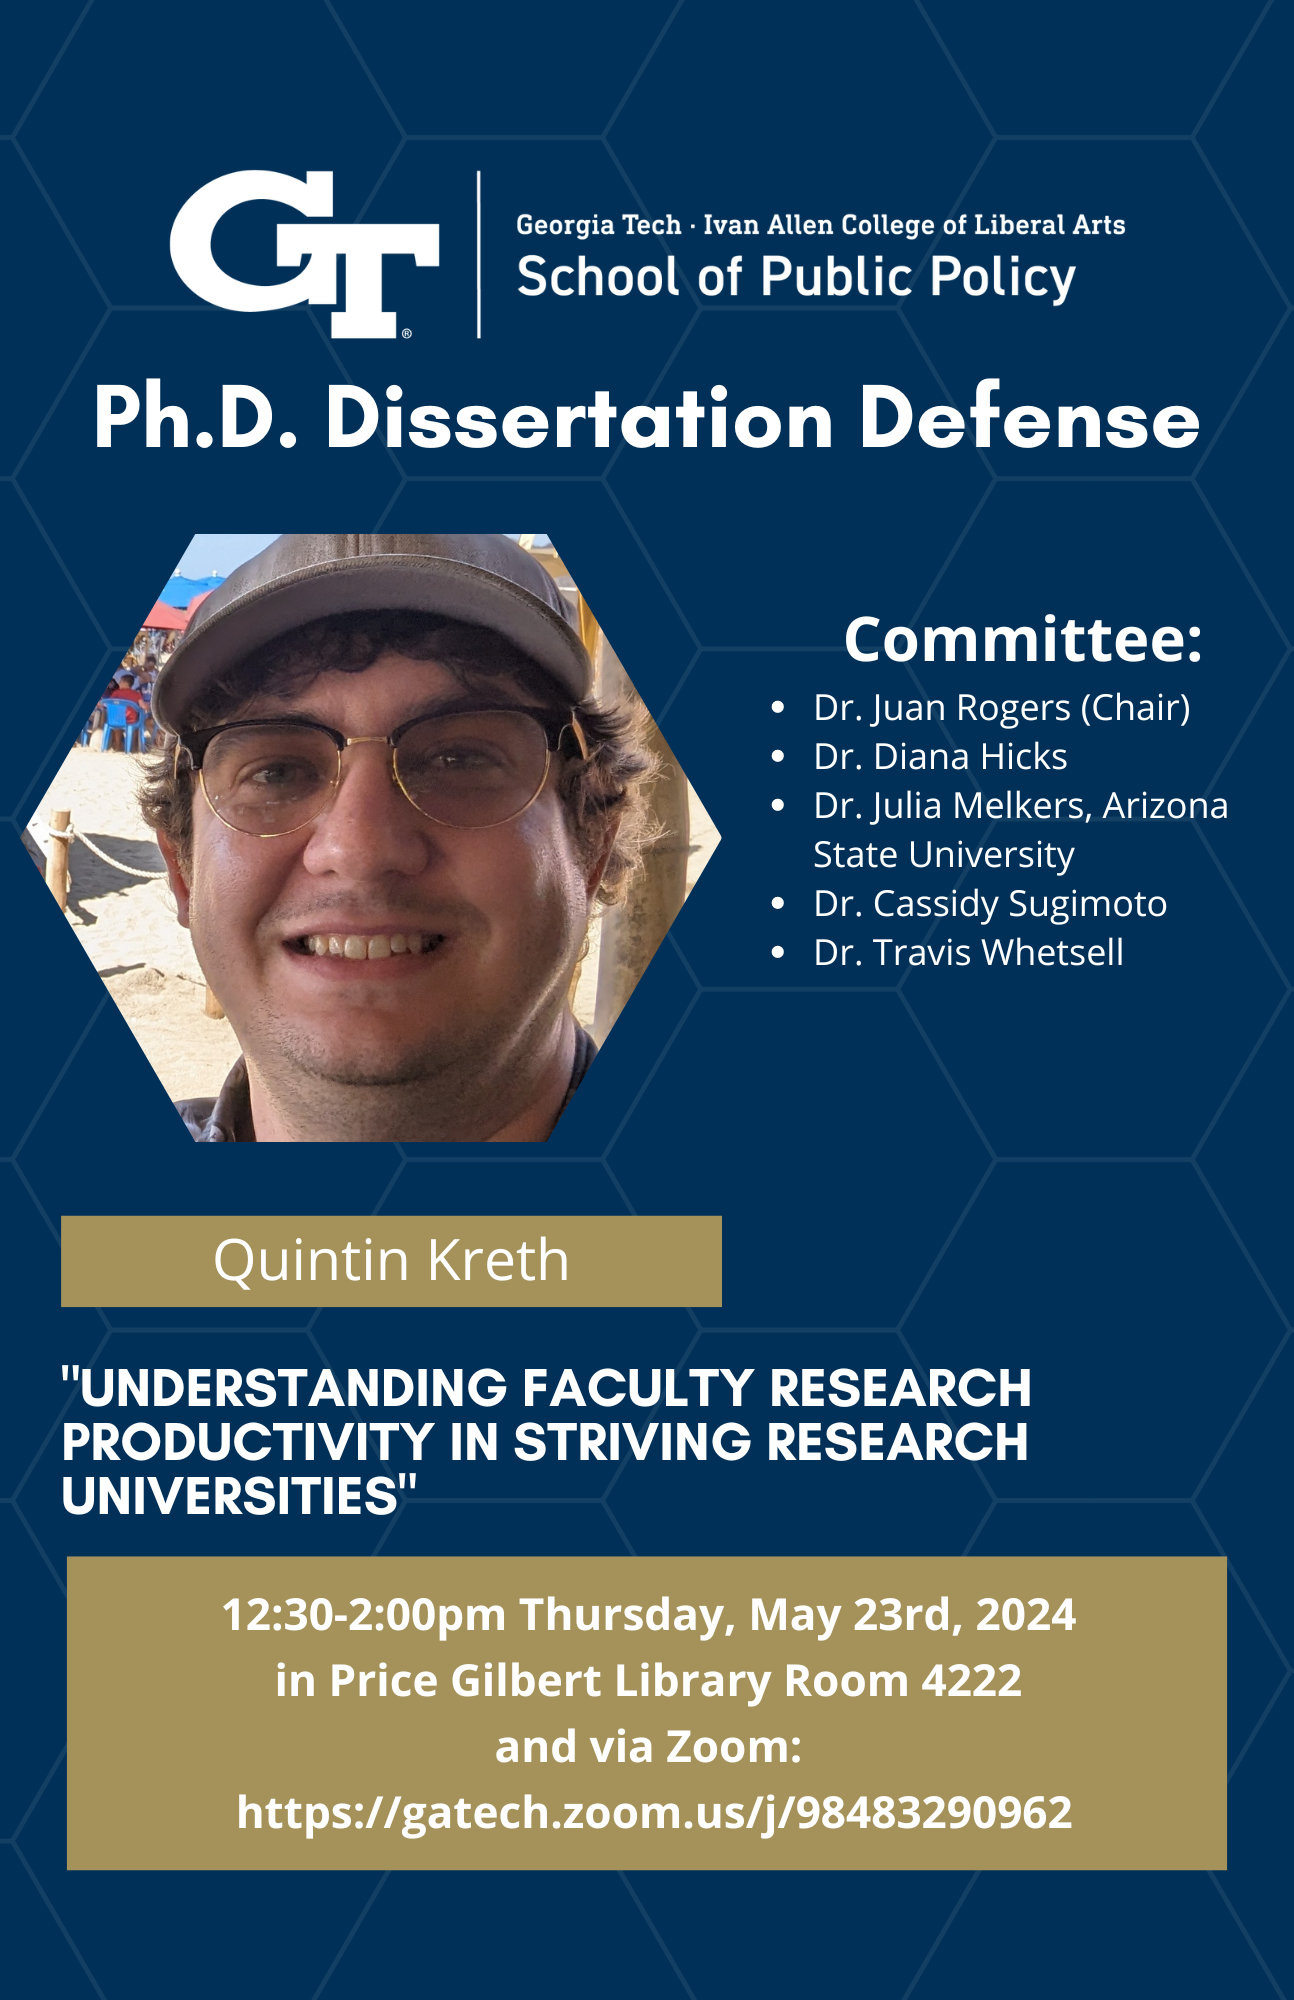 "Understanding Faculty Research Productivity in Striving Research Universities" 12:30-2:00PM Thursday May 23rd, 2024 in Price Gilbert Library Room 4222 and via zoom https://gatech.zoom.us/j/98320962